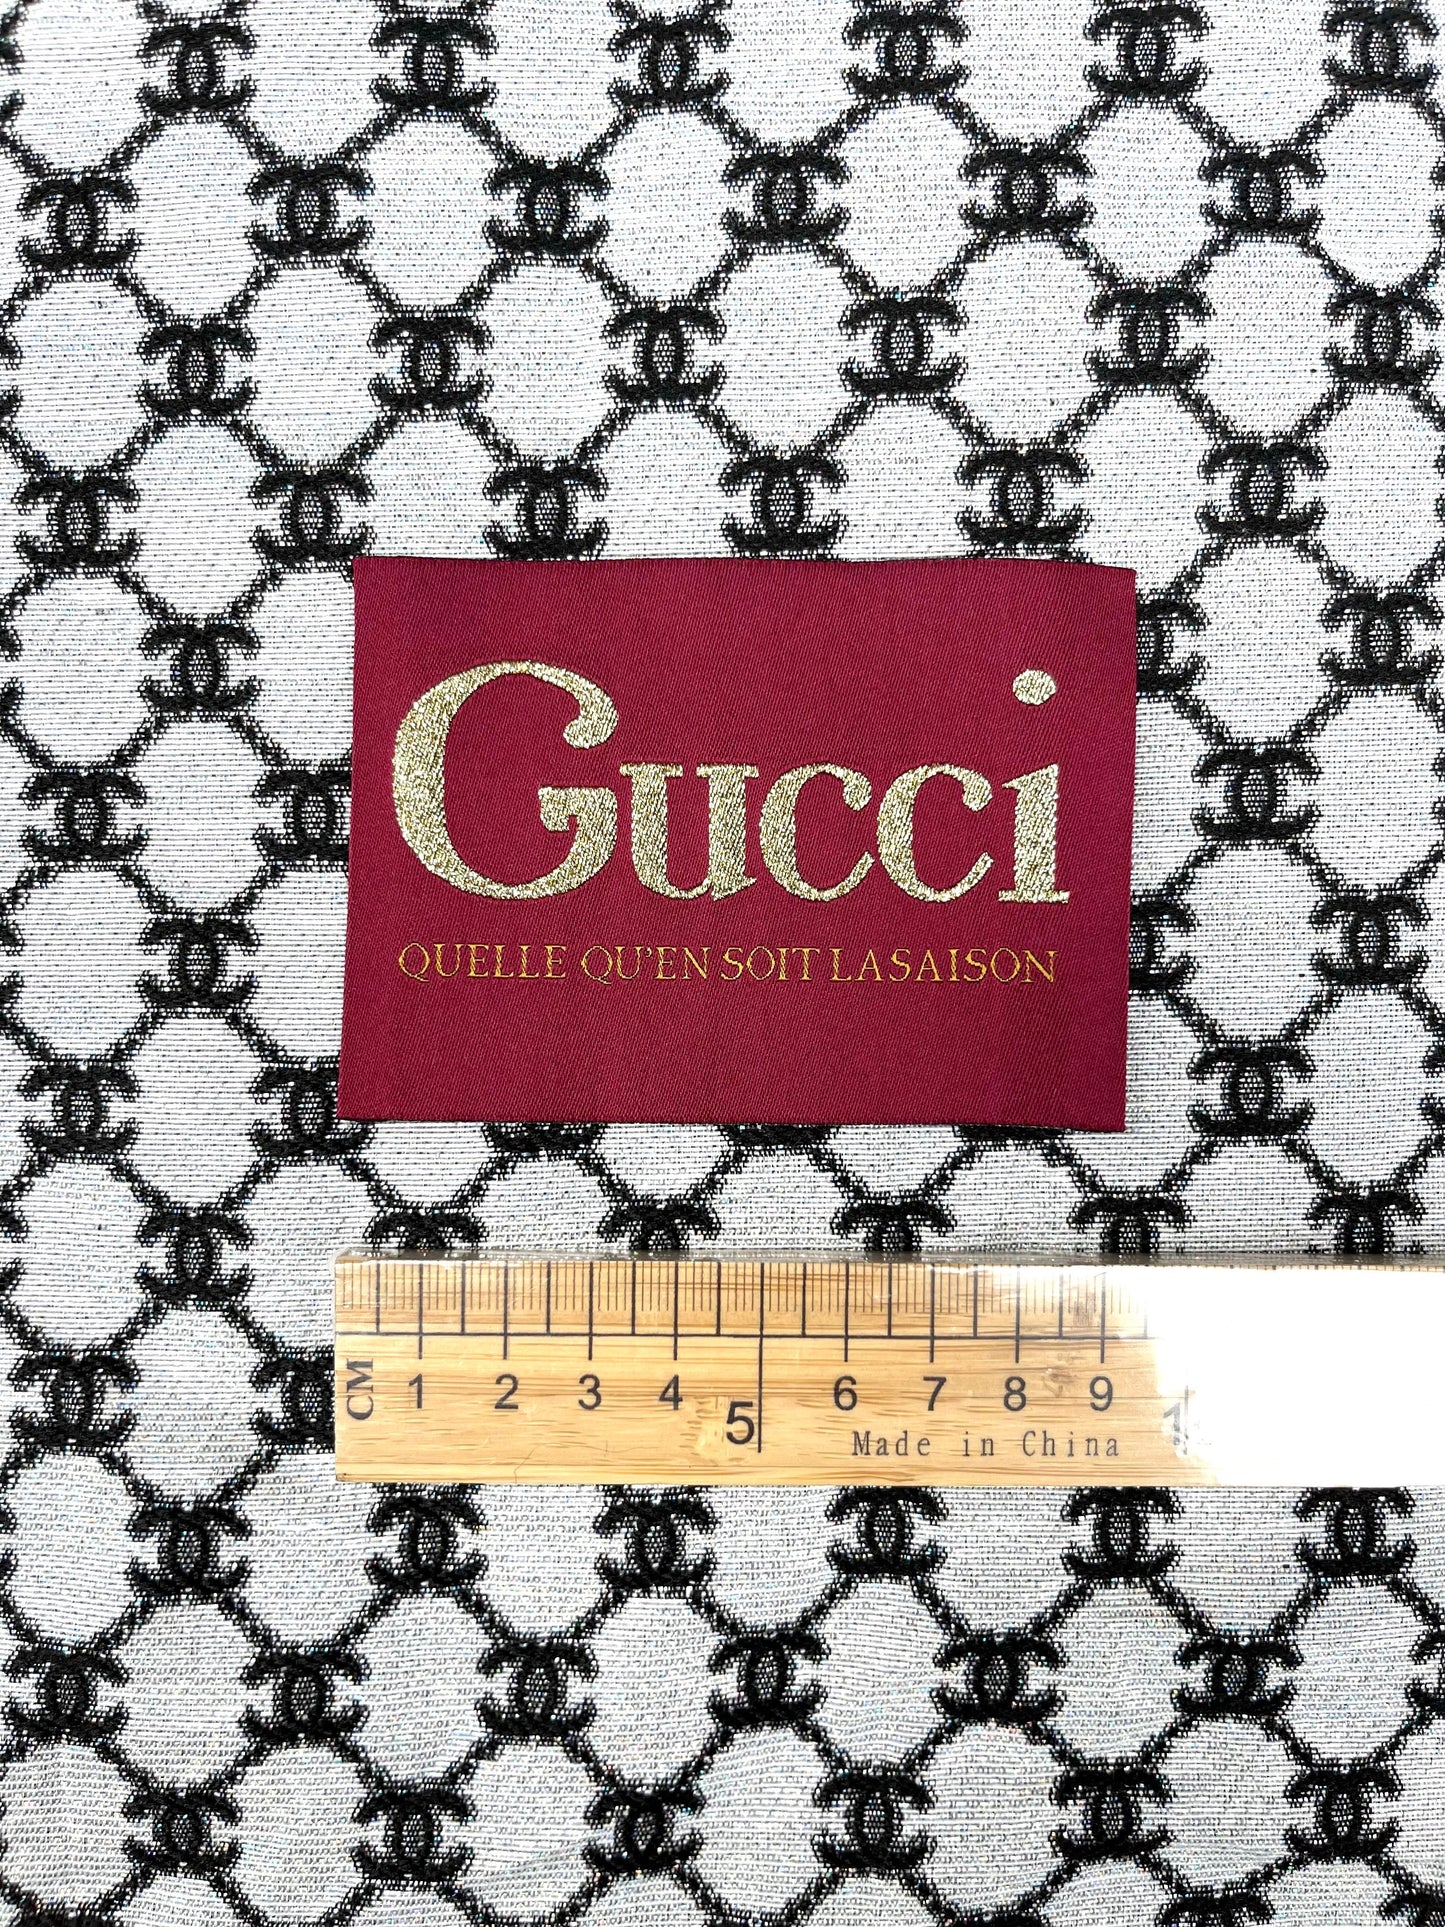 Handmade Sewing Gucci Label Tags for Handmade DIY